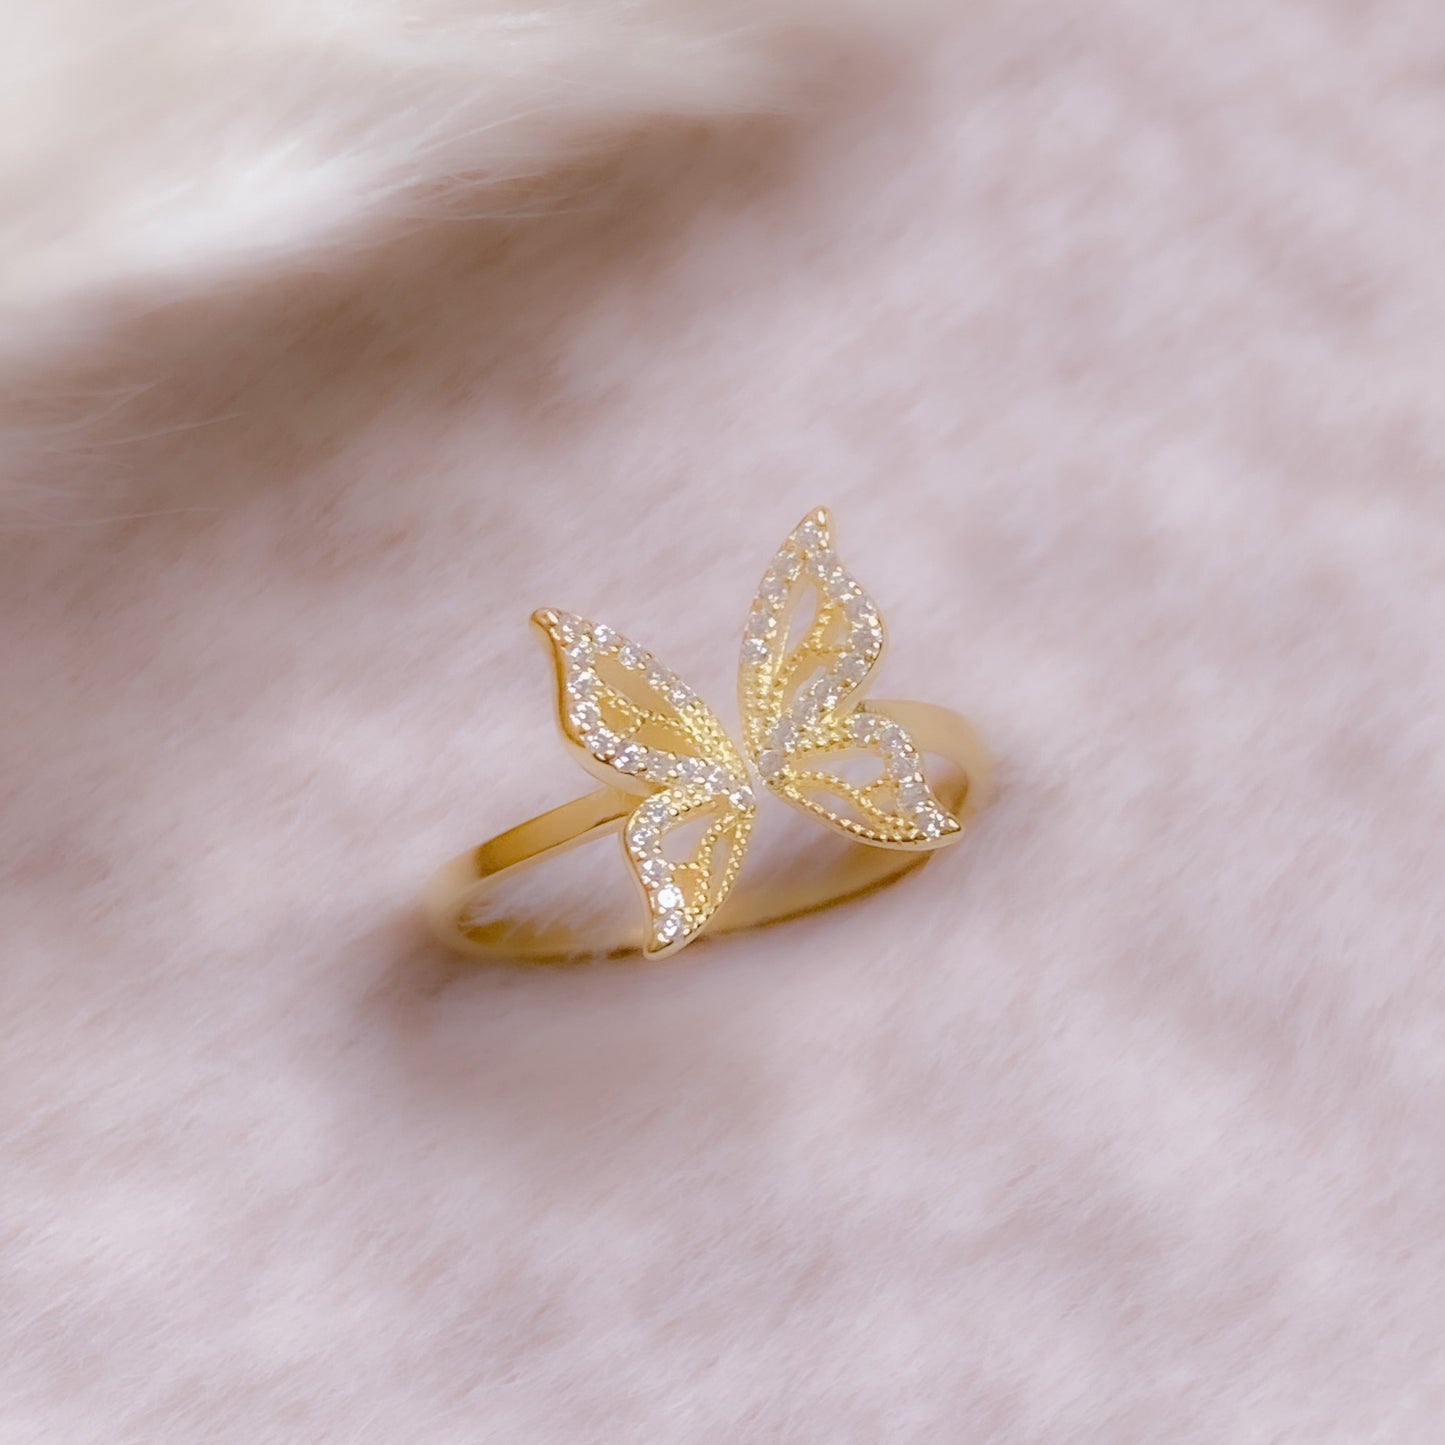 Butterfly Princess Ring